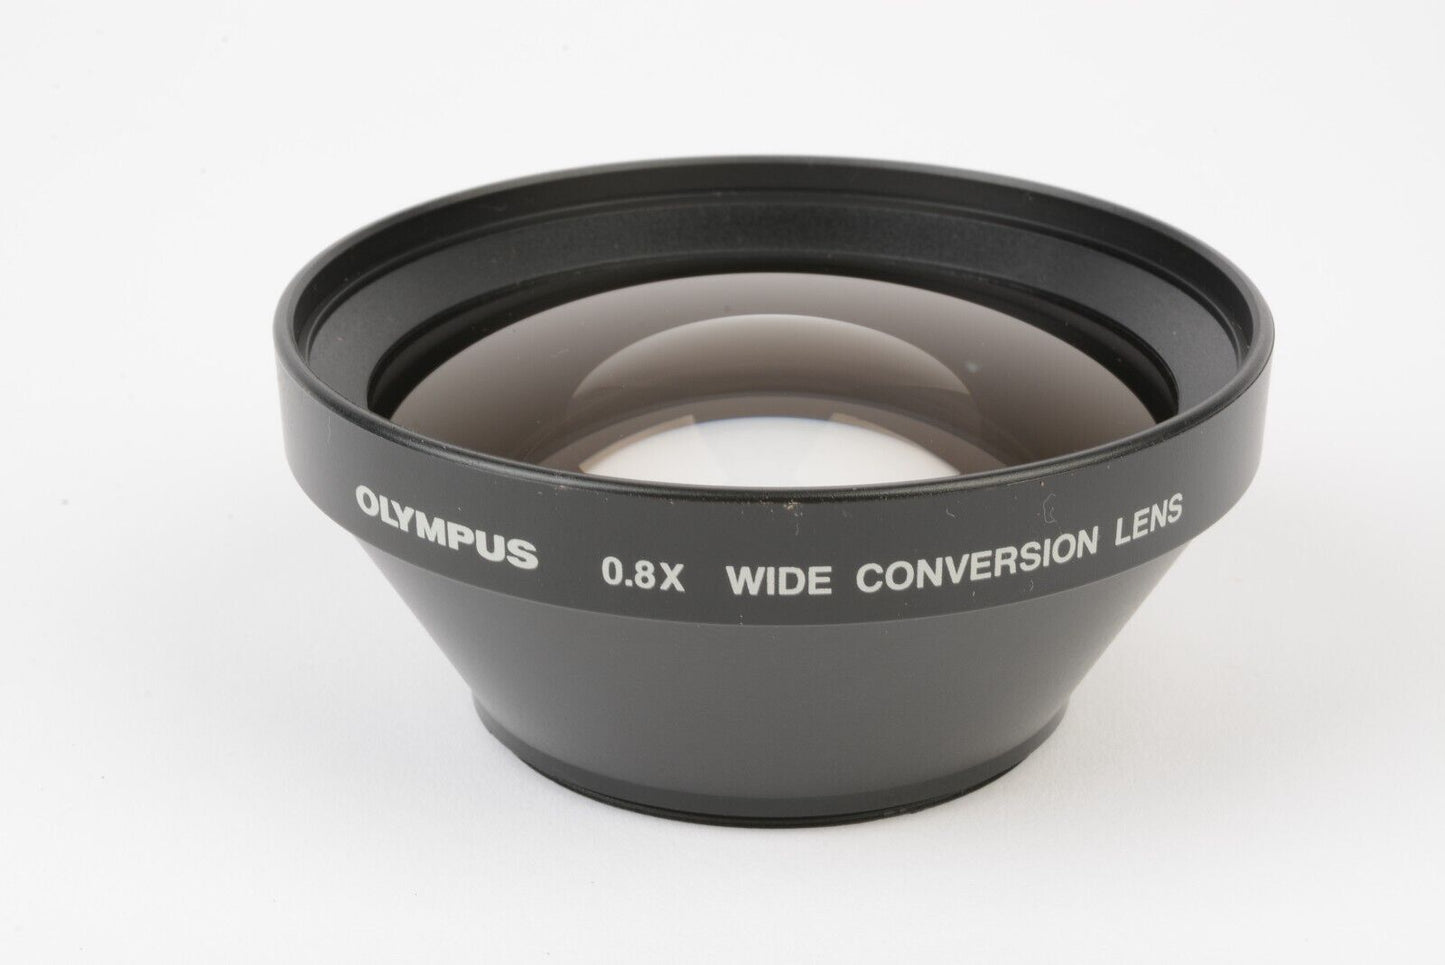 MINT- OLYMPUS .8X WIDE CONVERSION LENS 55mm THREAD, CAPS+POUCH